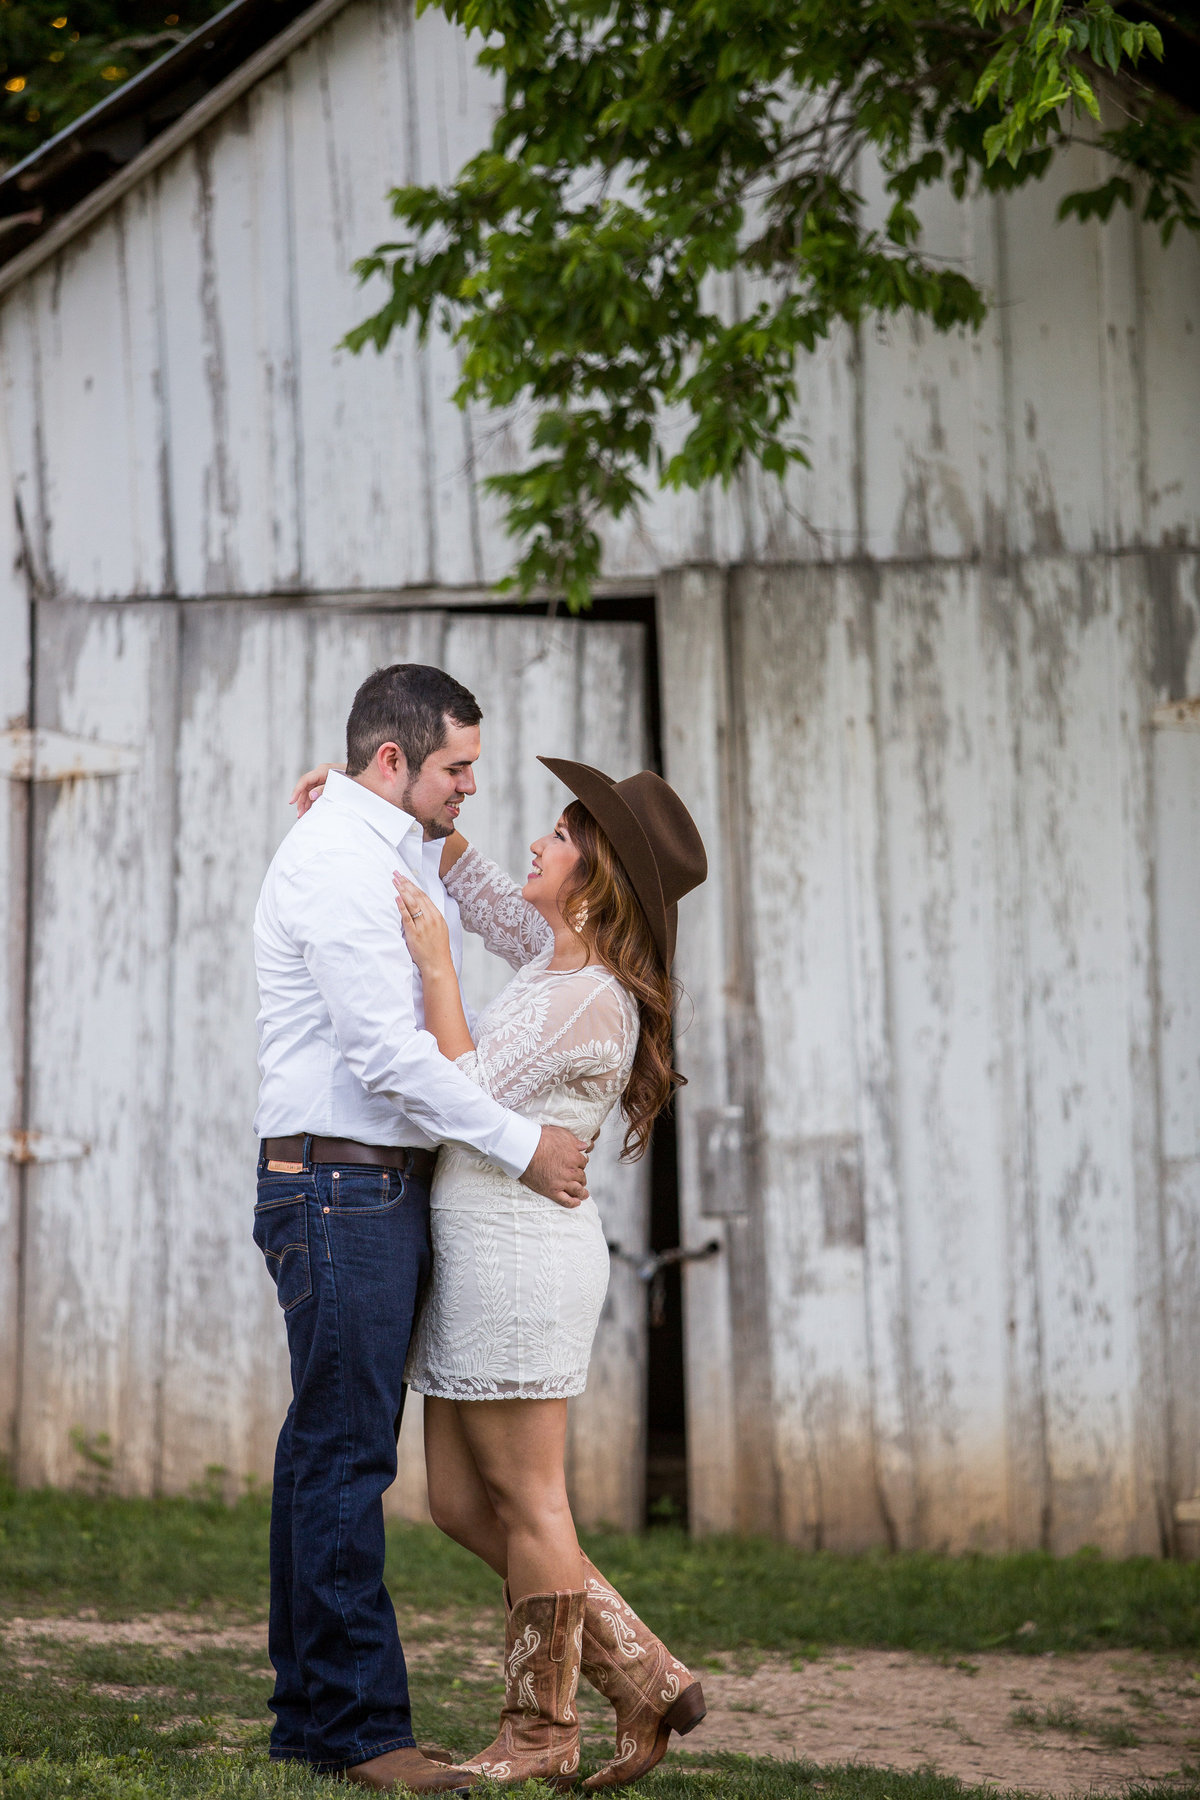 Engagement session a Gruene where woman wears her fiancé's cowboy hat and lifts her leg.